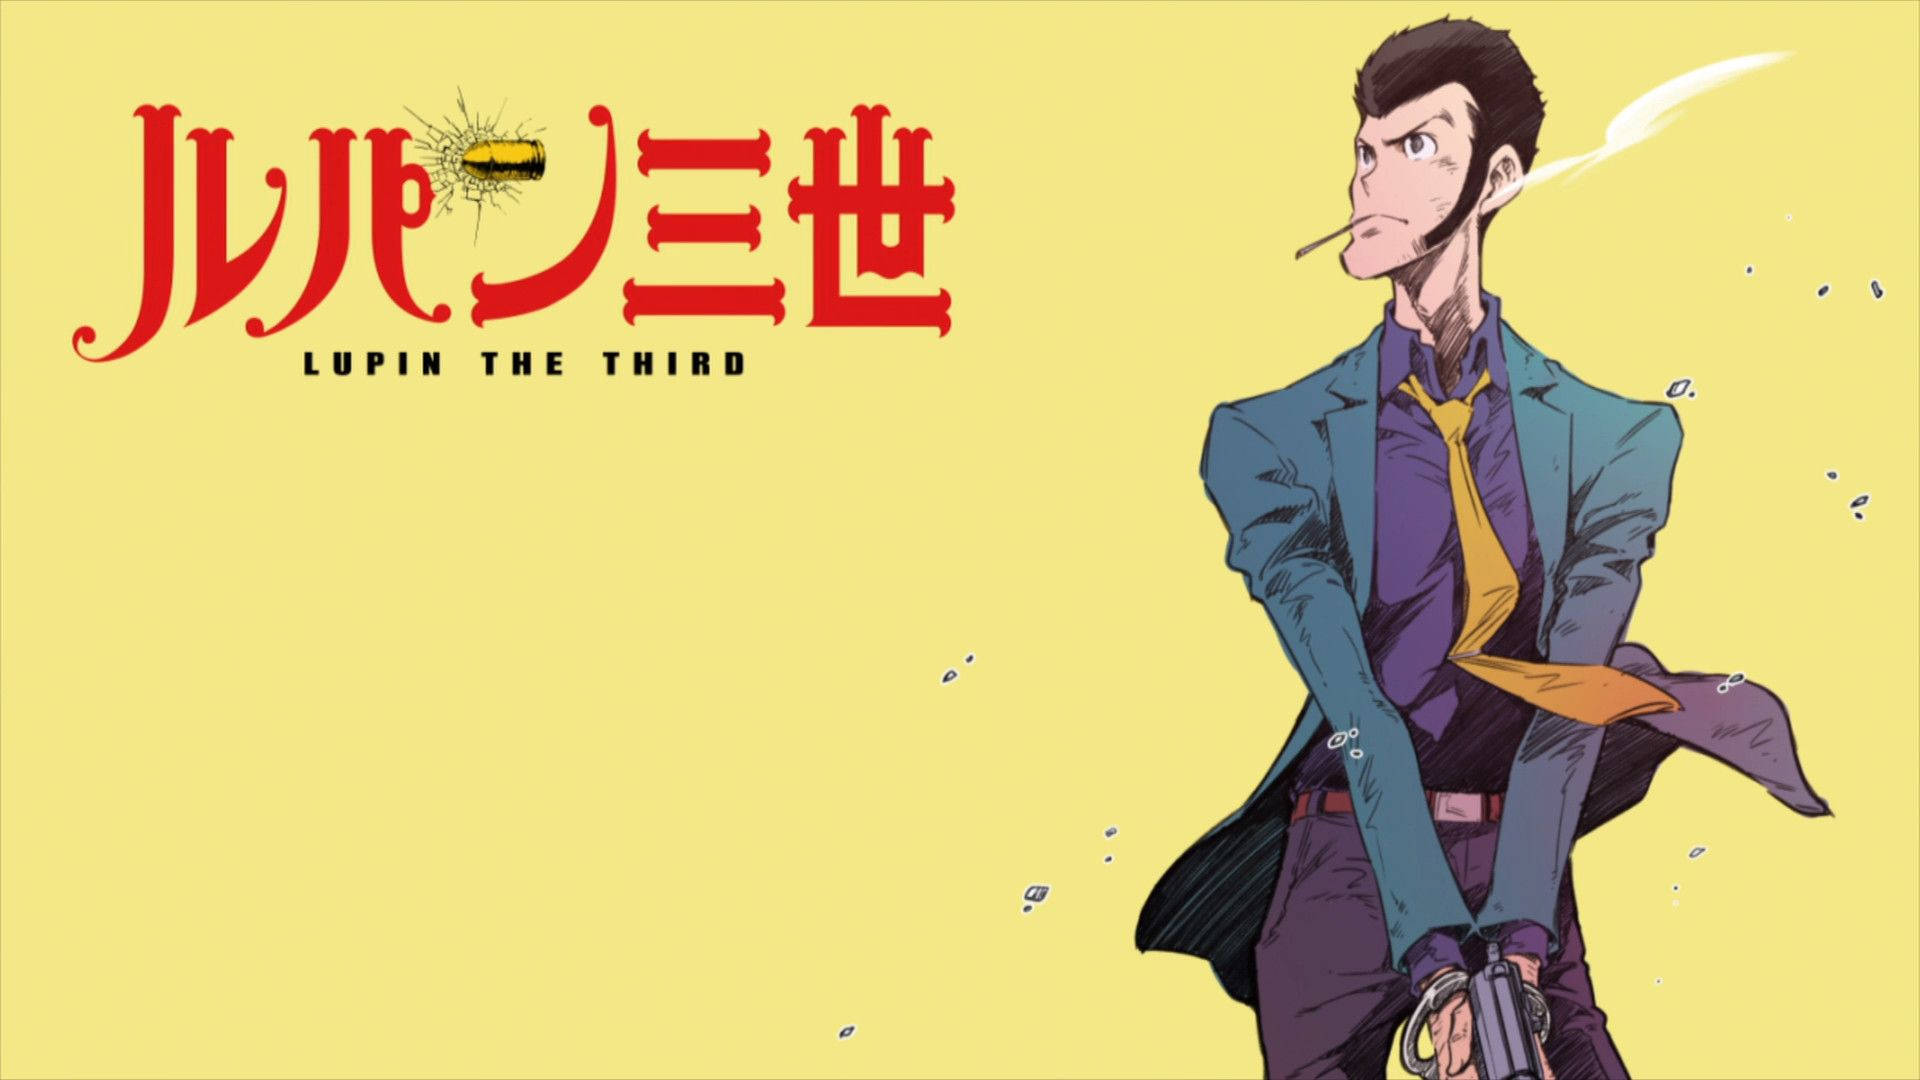 Anime Lupin The Third Background